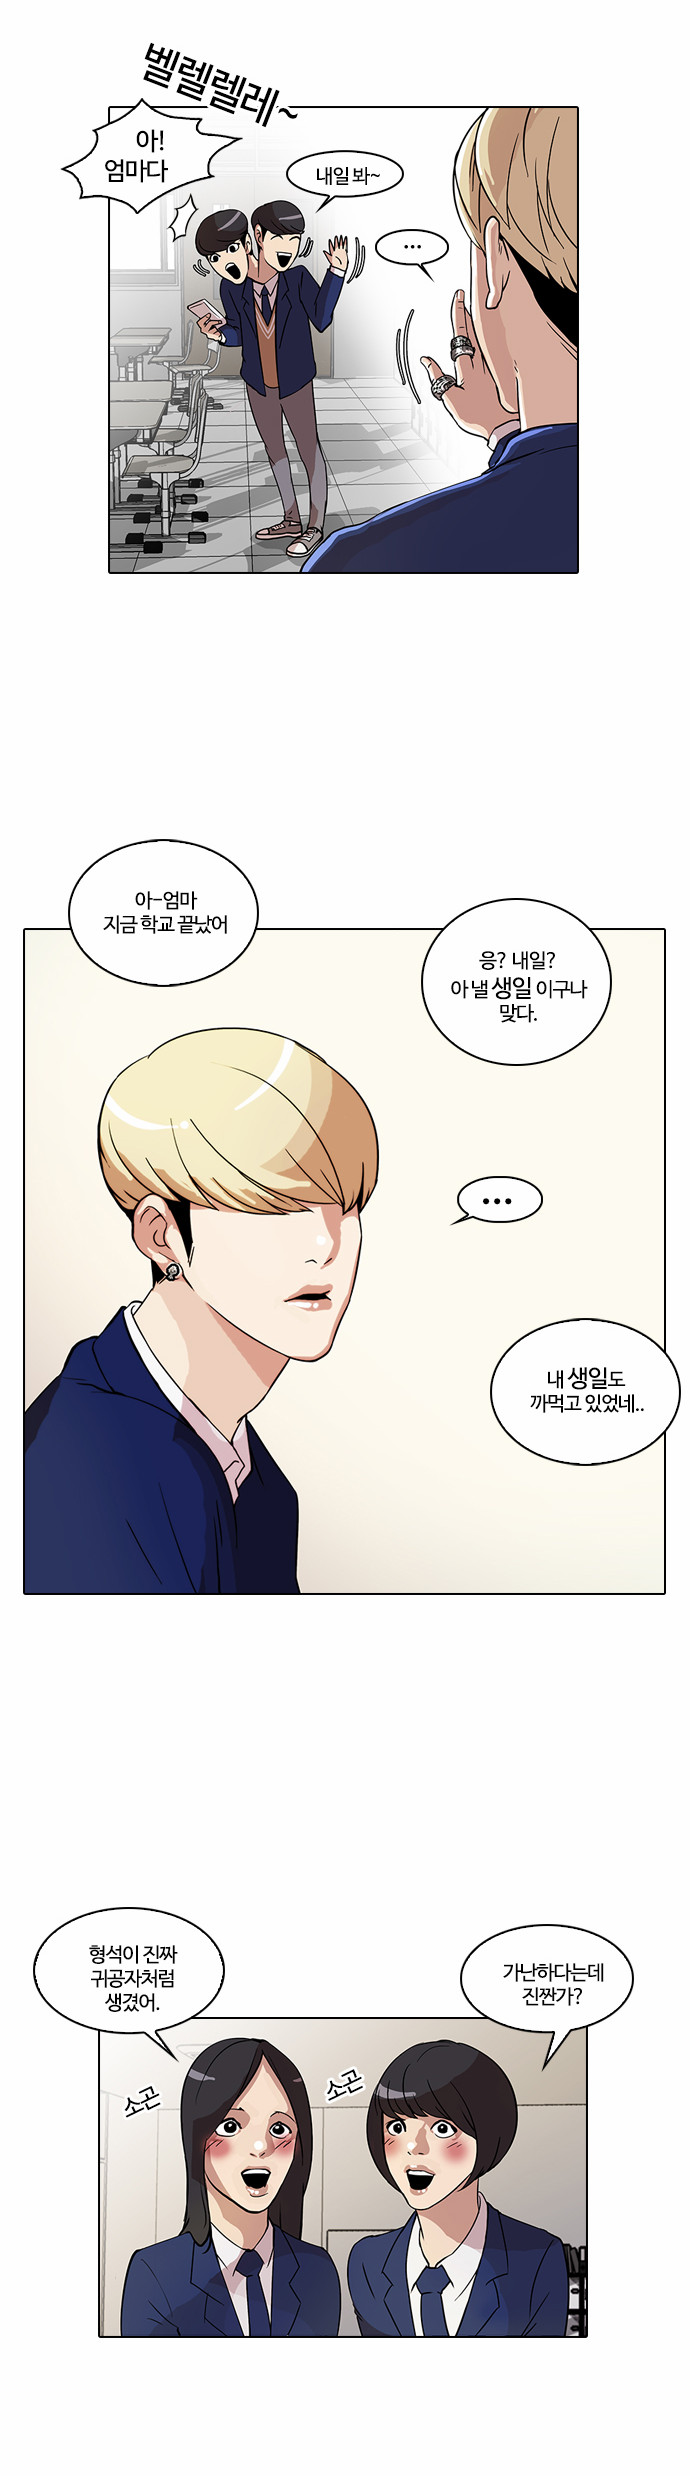 Lookism - Chapter 20 - Page 3